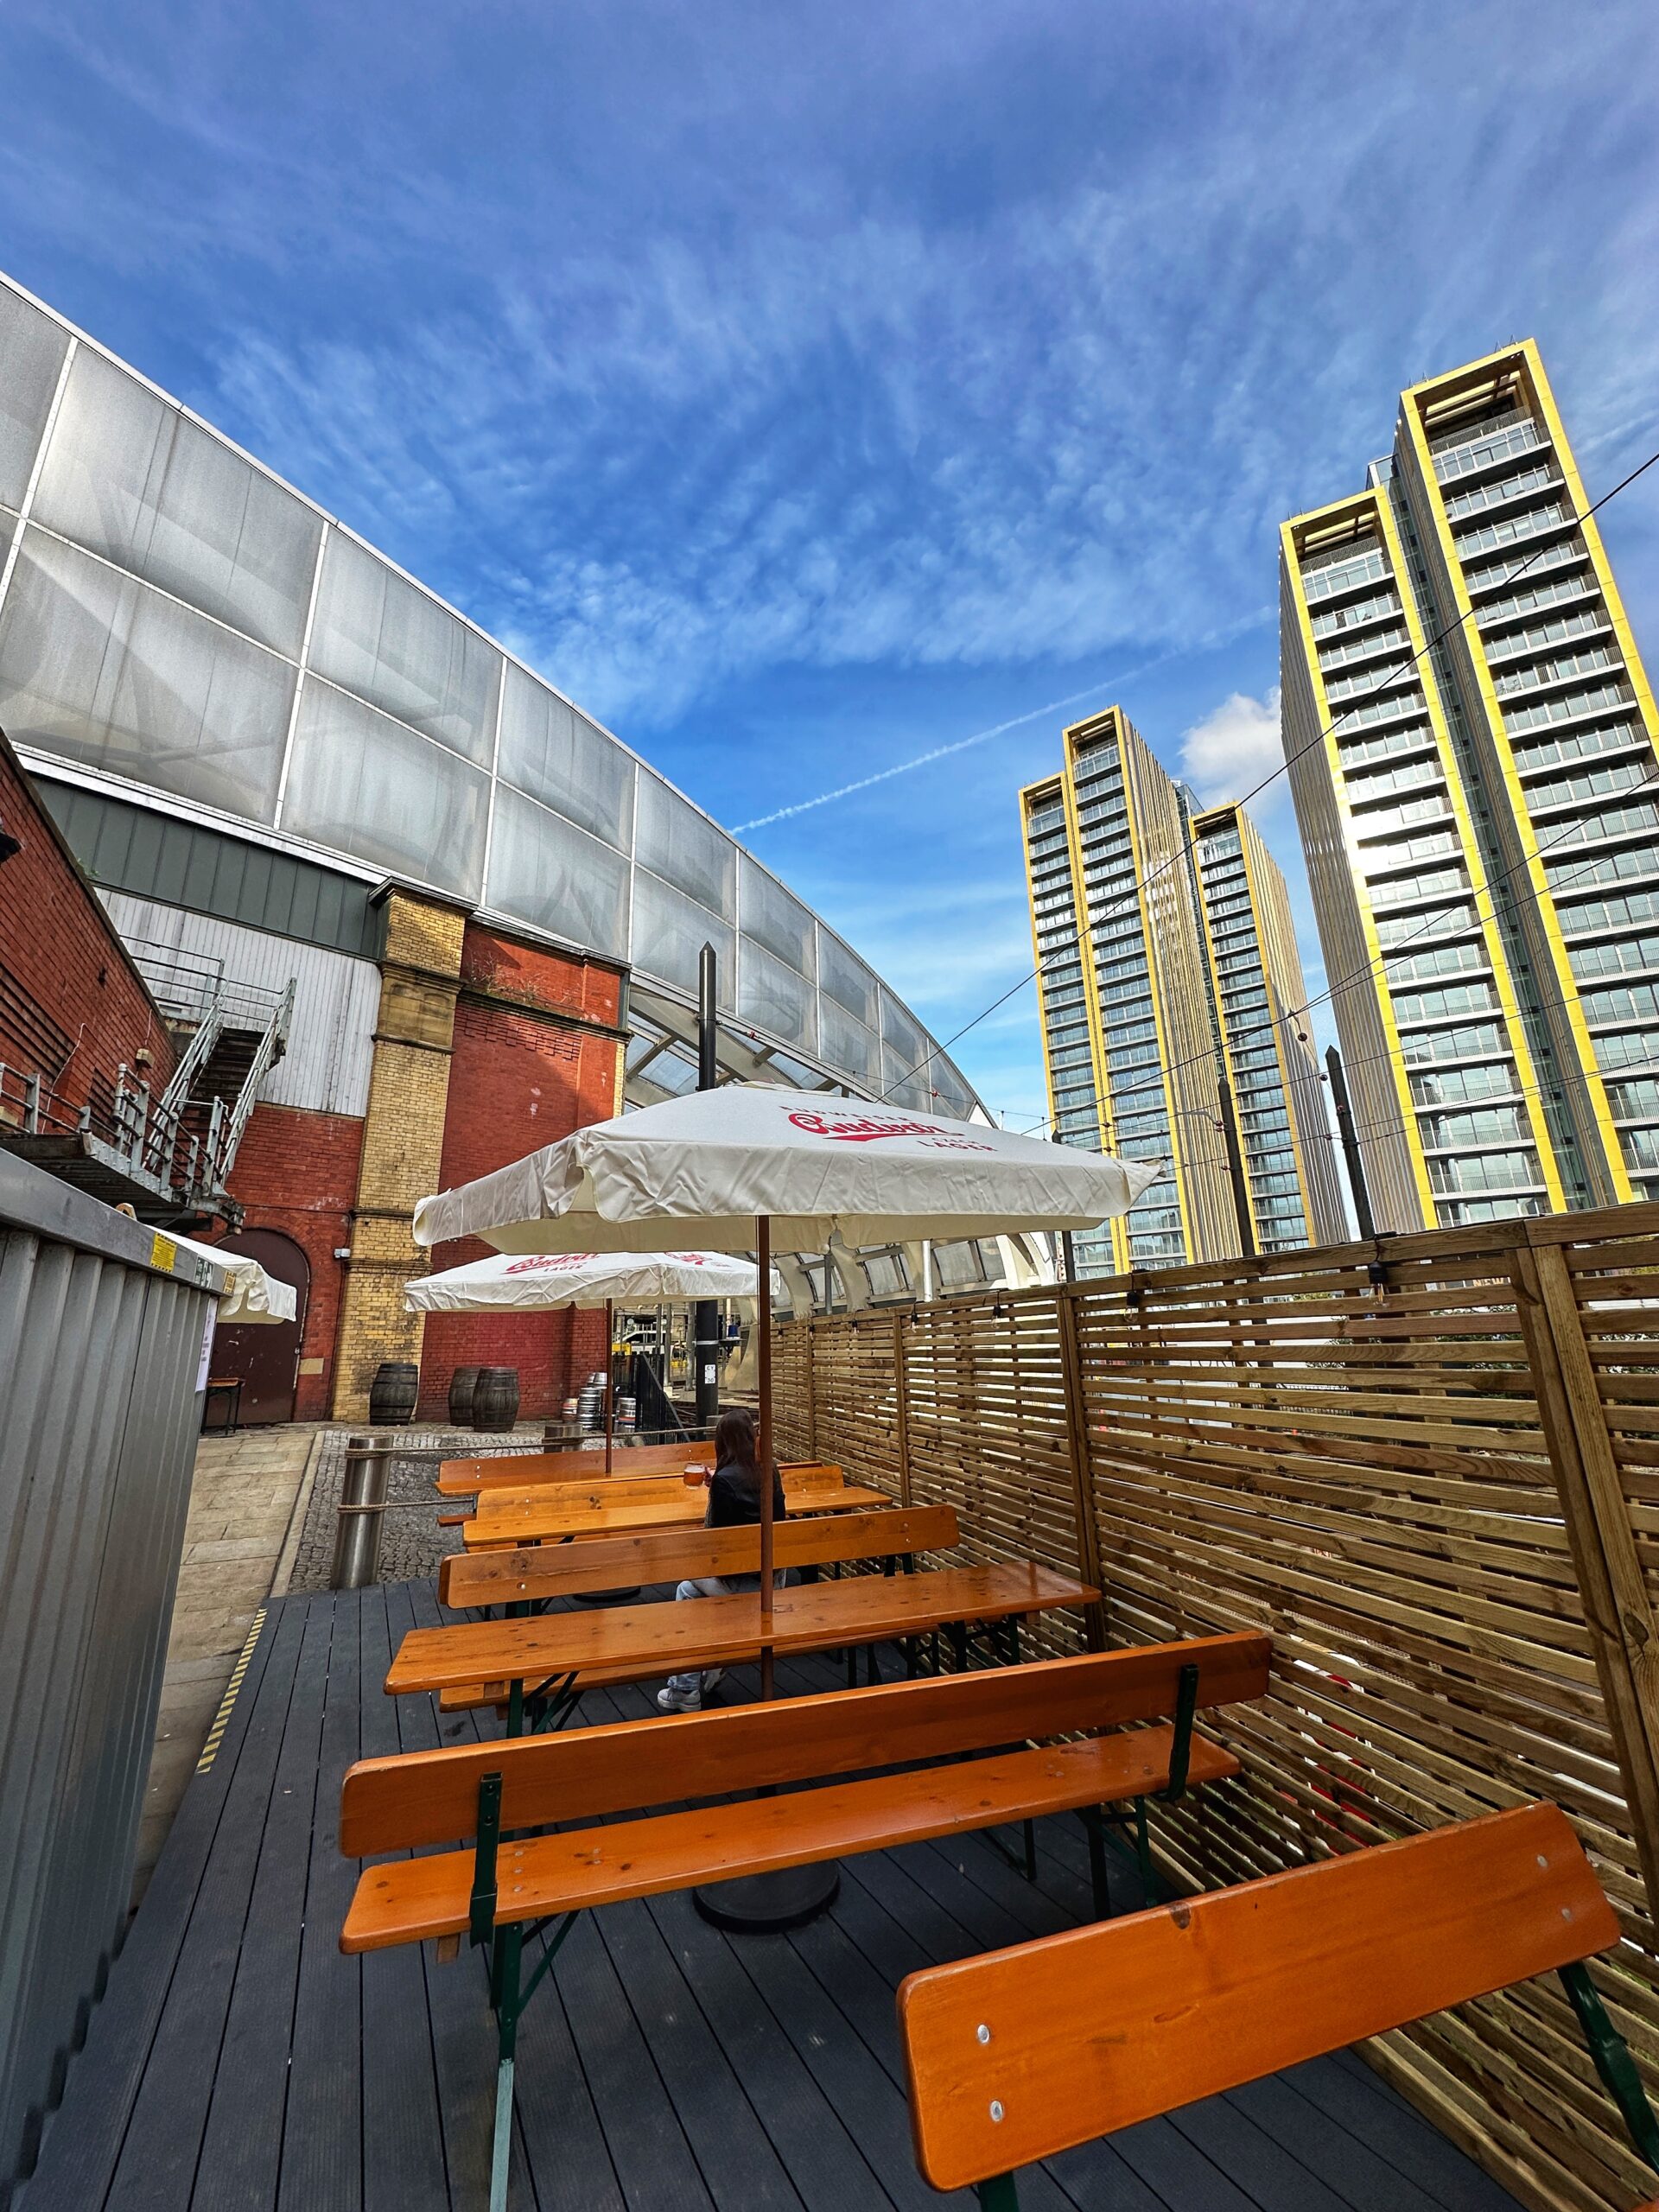 The beer garden at Victoria Tap in Manchester. Credit: The Manc Group